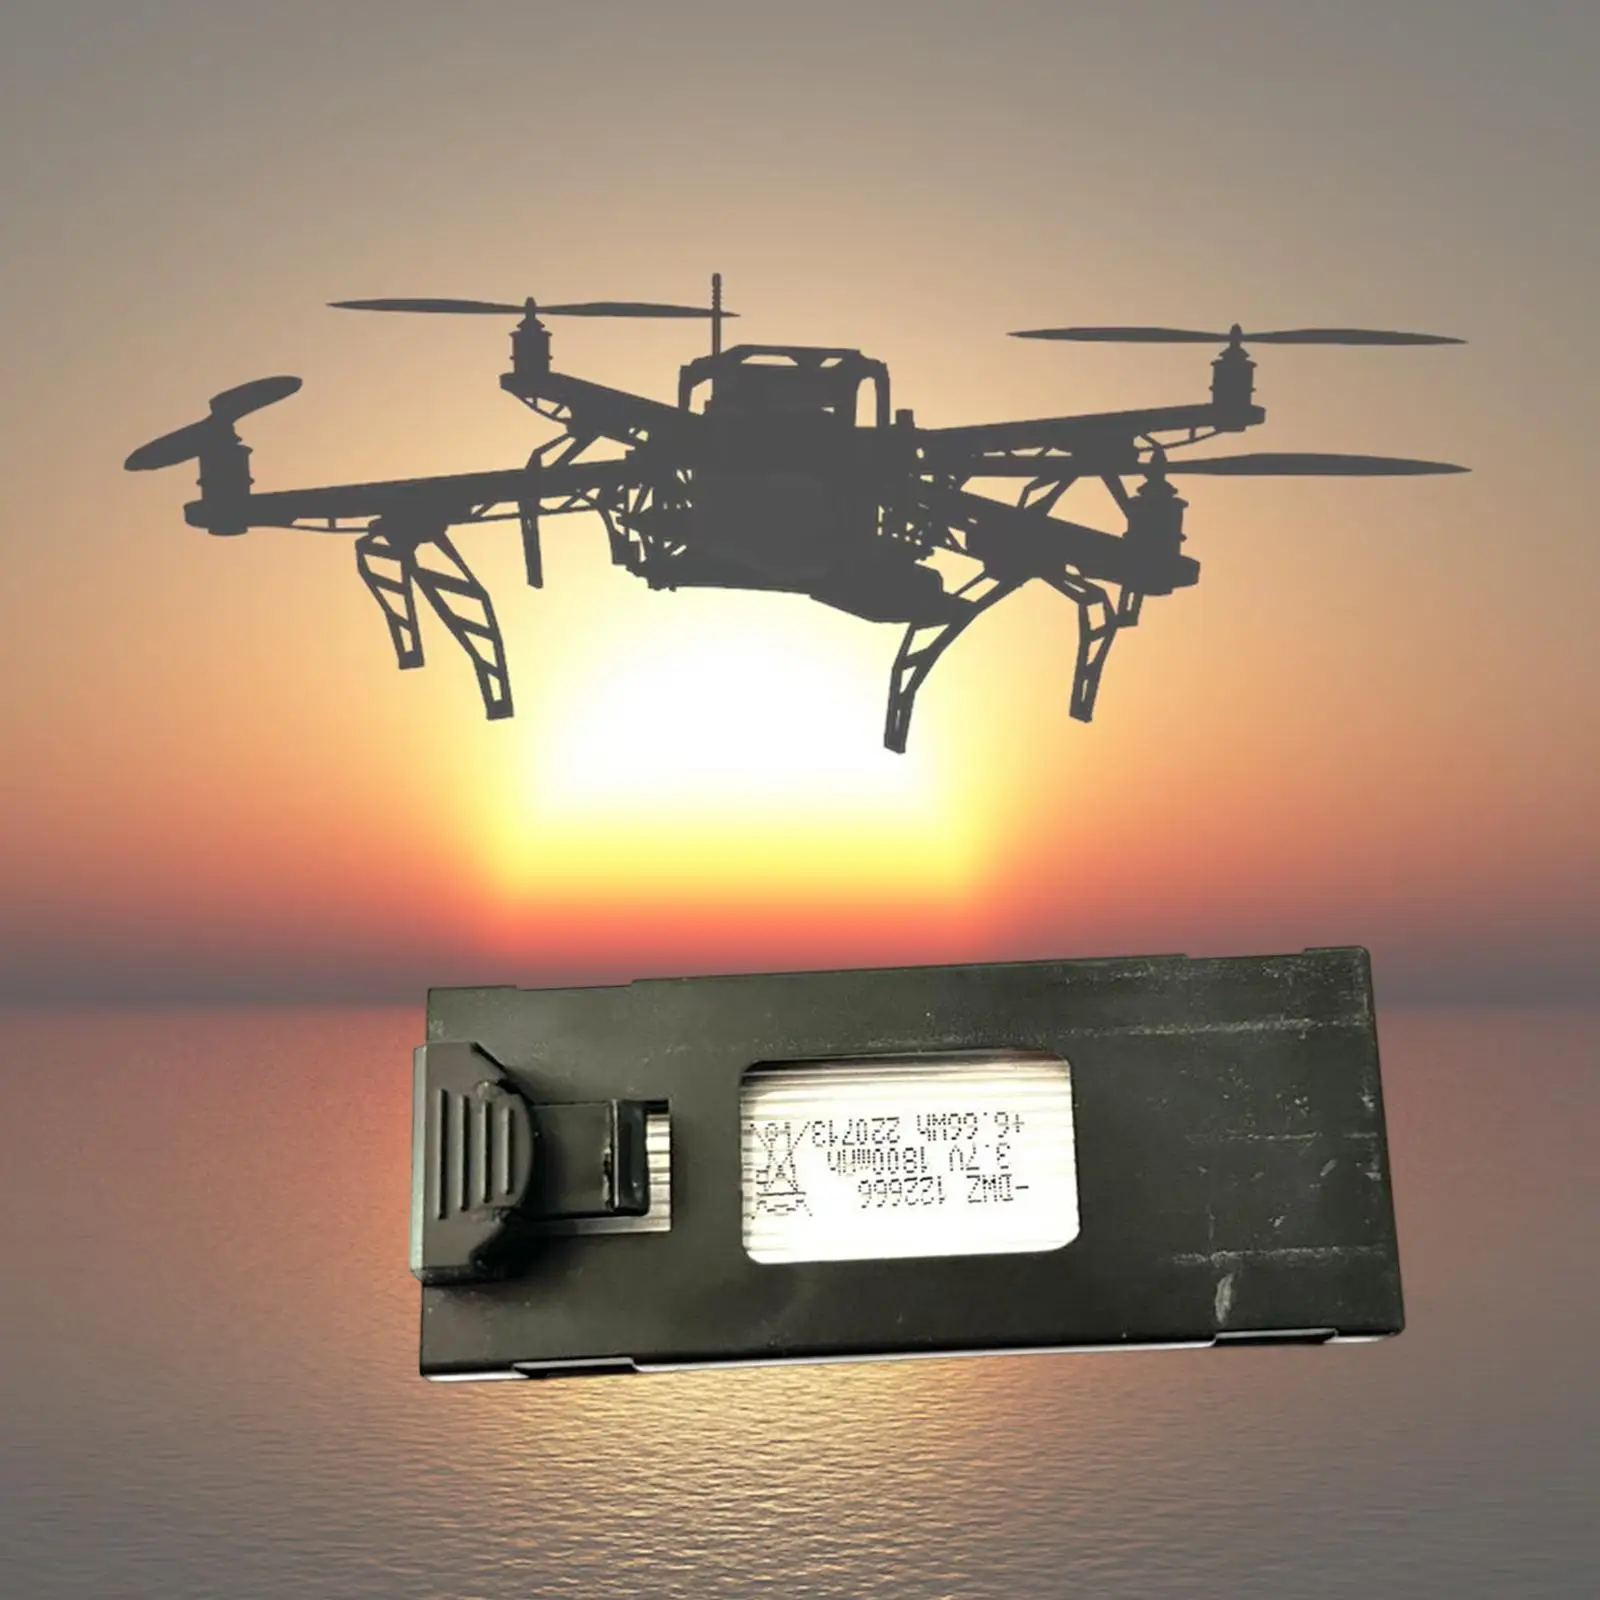 Large Capacity Lithium battery easily Install Portable 3.7V 1800mAh for H106 Drone RC Quadcopter RC Helicopter RC Aircraft